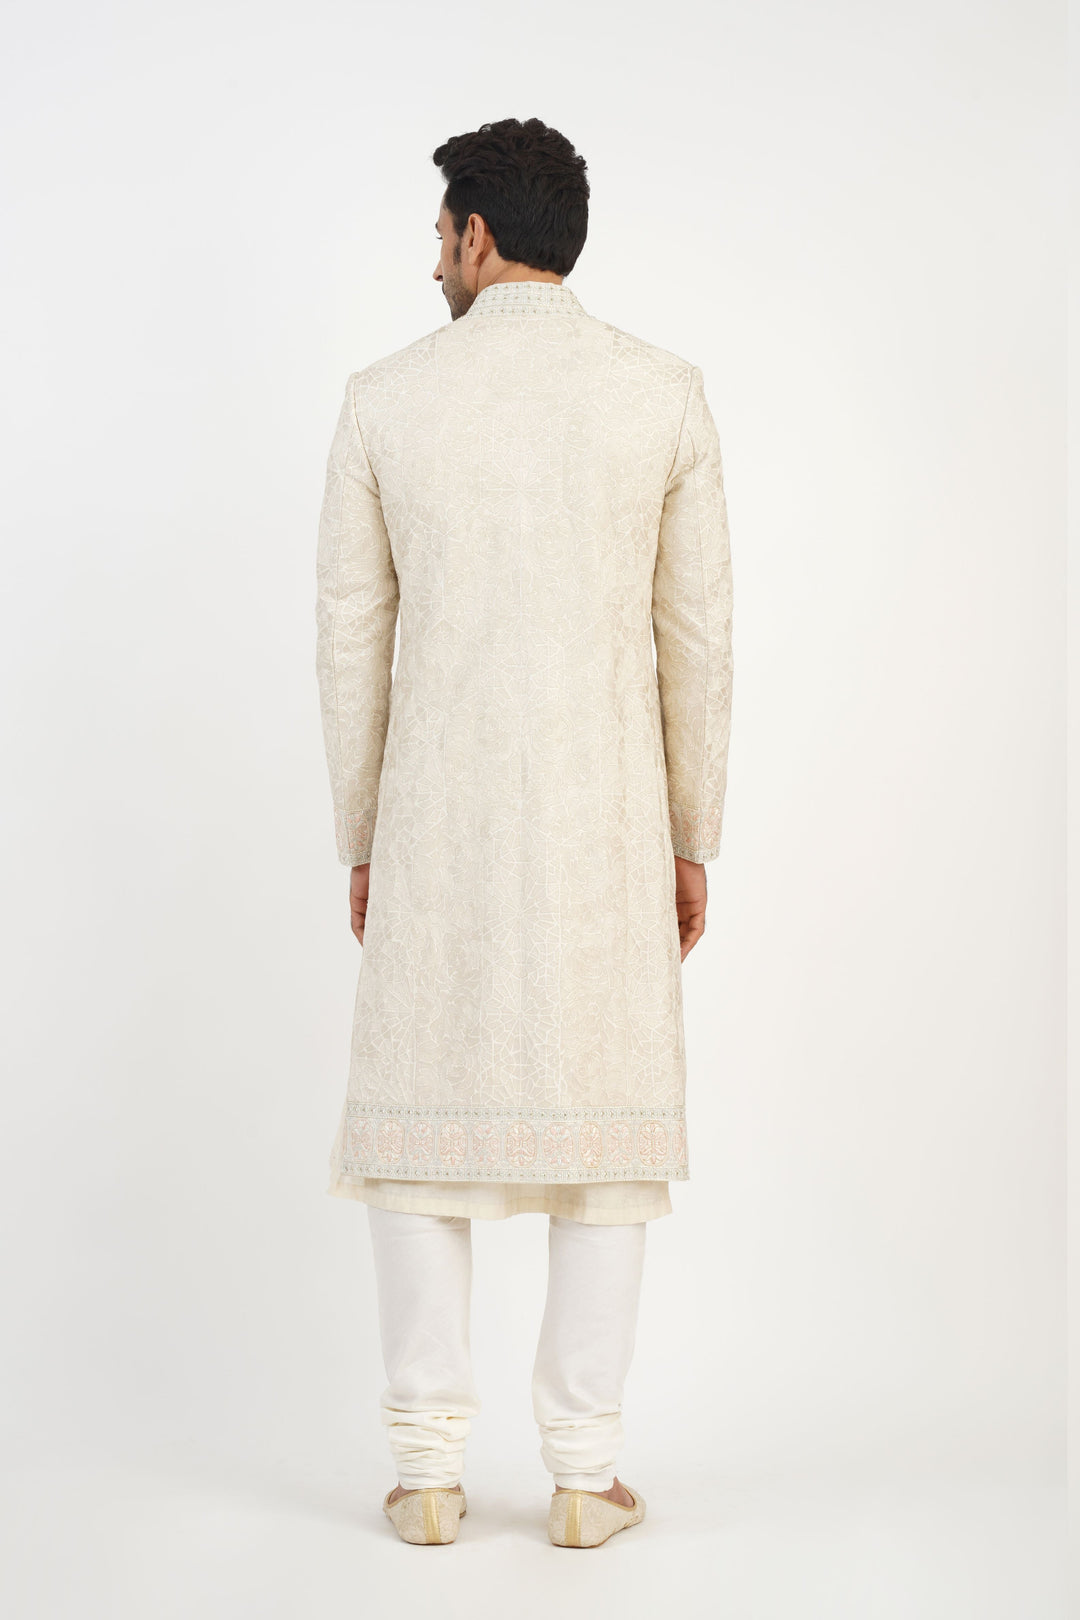 Ivory Heavy Machine Embroidered Sherwani Highlighted with sequince.